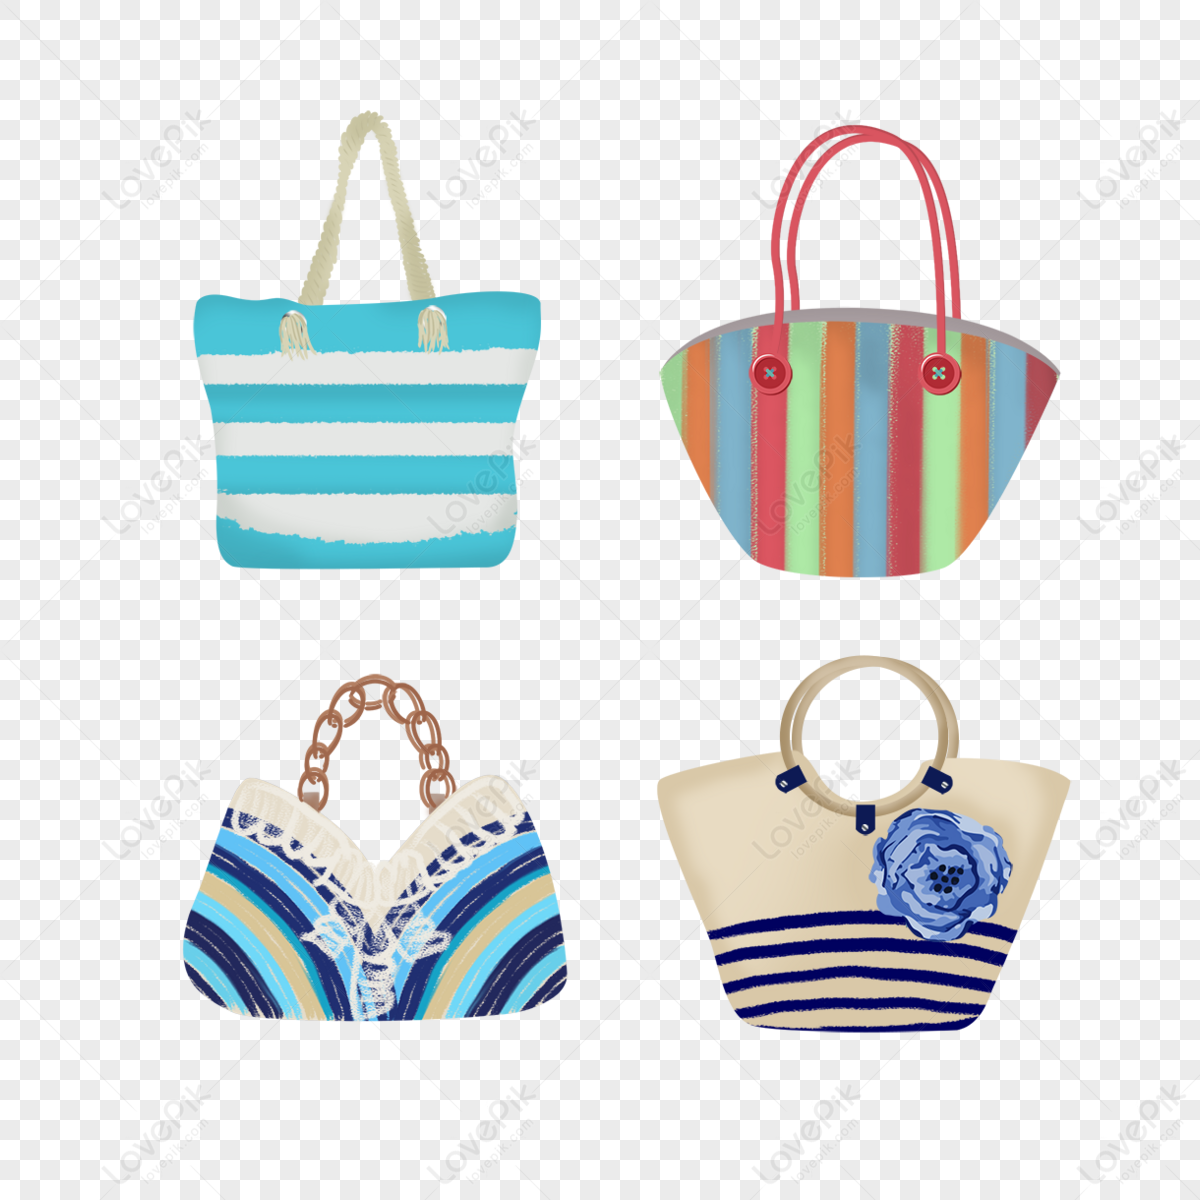 Purse Vector PNG Images, Purse Vector Clipart Free Download